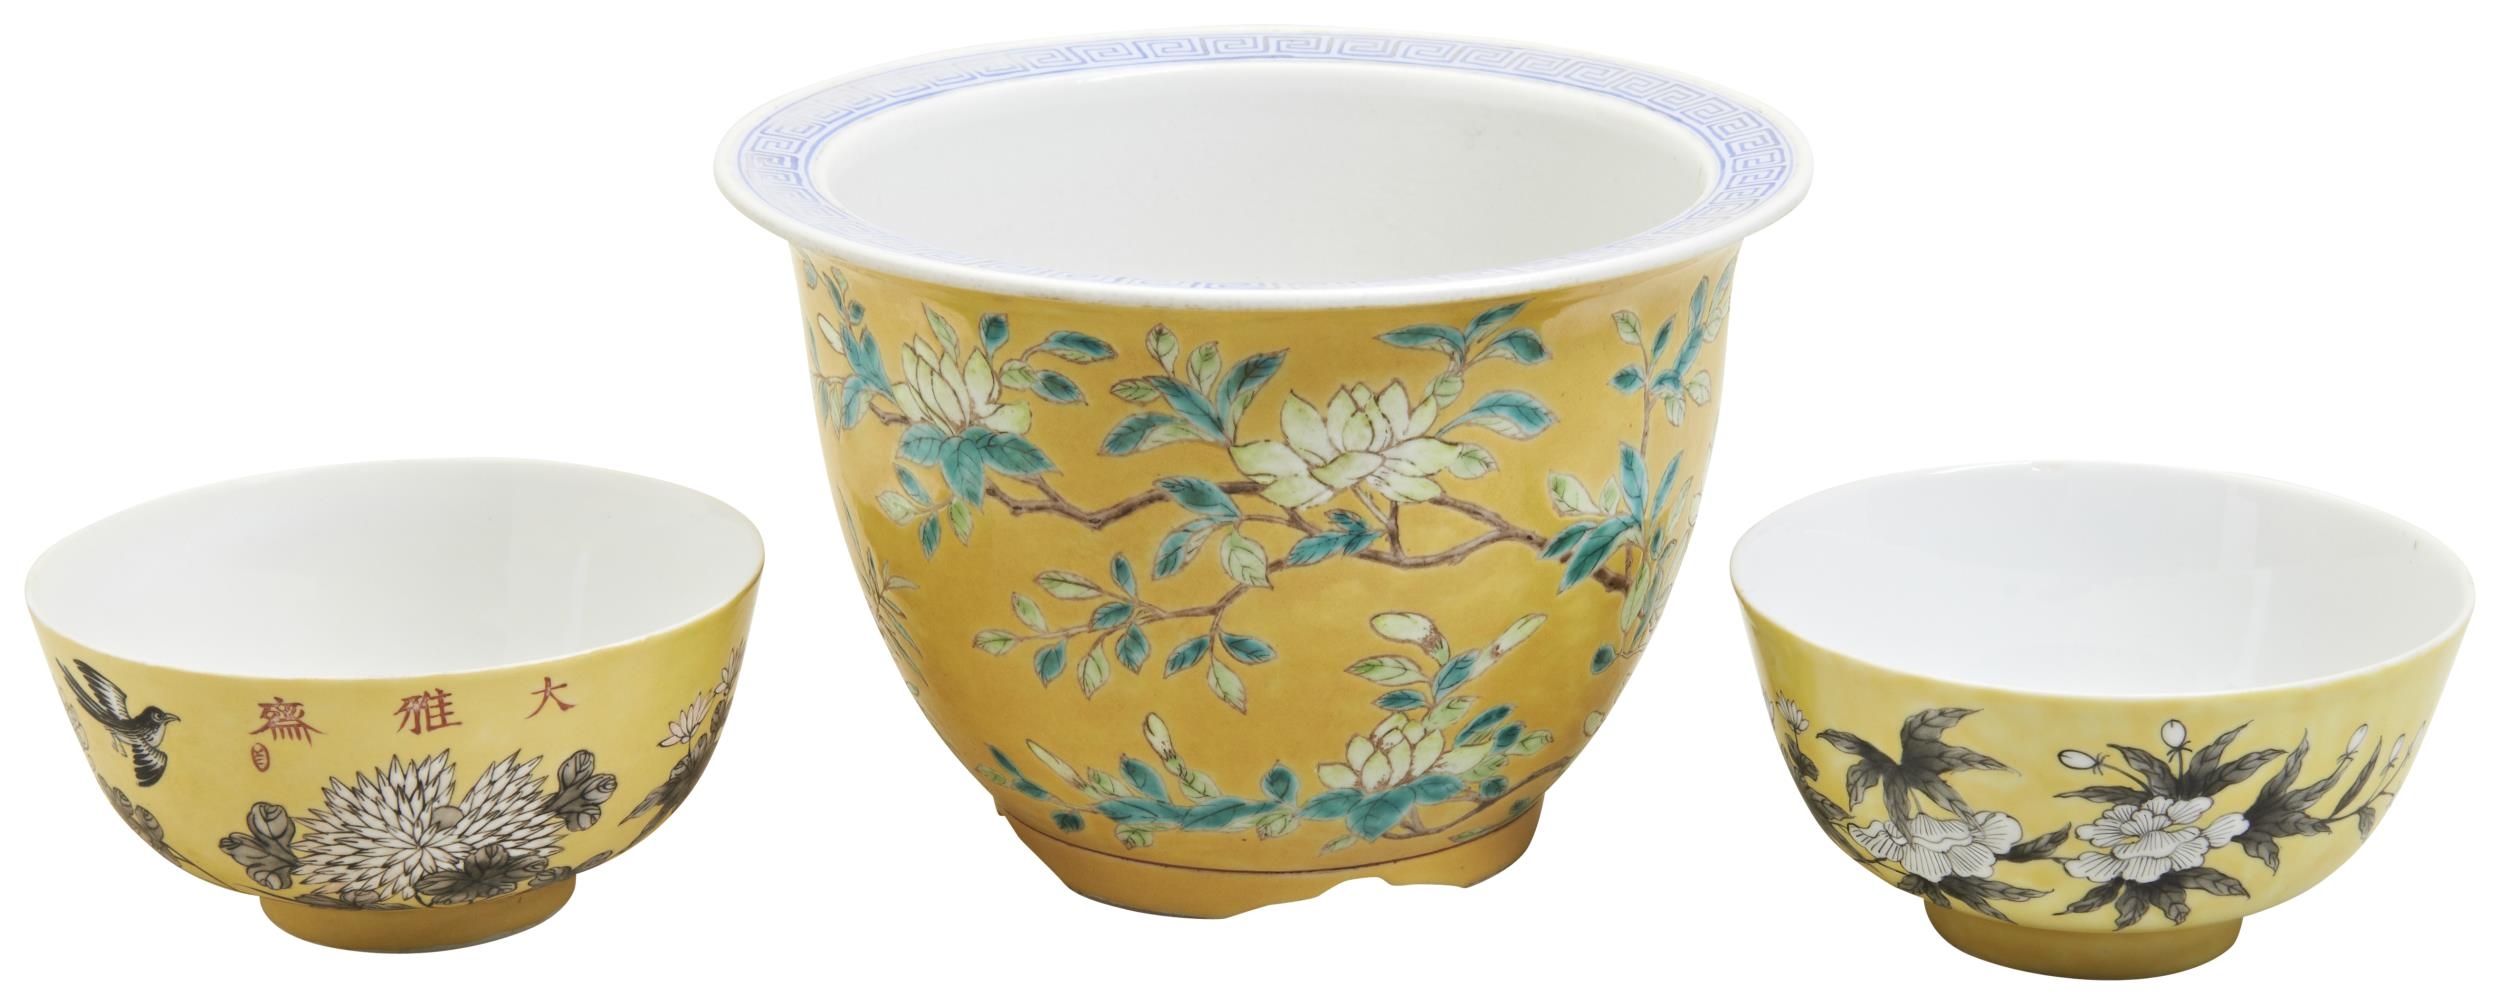 A PAIR OF FAMILLE ROSE YELLOW GROUND BOWL AND A JARDINIERE  19TH/20TH CENTURY  two yellow ground - Image 3 of 3